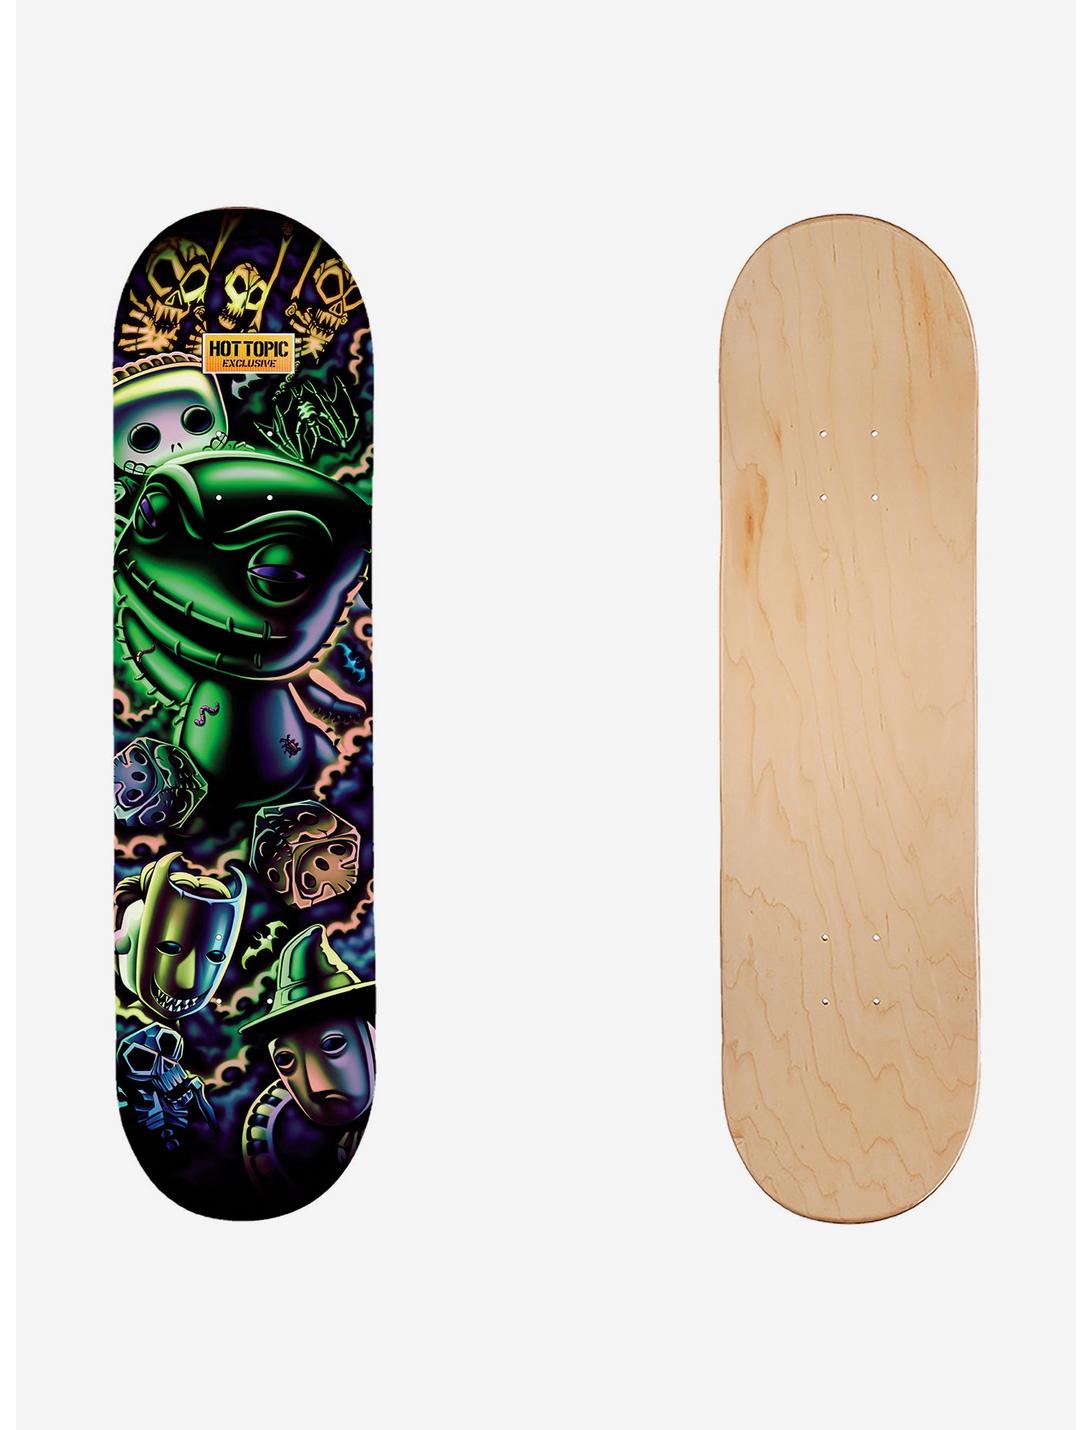 Funko The Nightmare Before Christmas Oogie Boogie Neon Skateboard Deck Hot Topic Exclusive, , hi-res